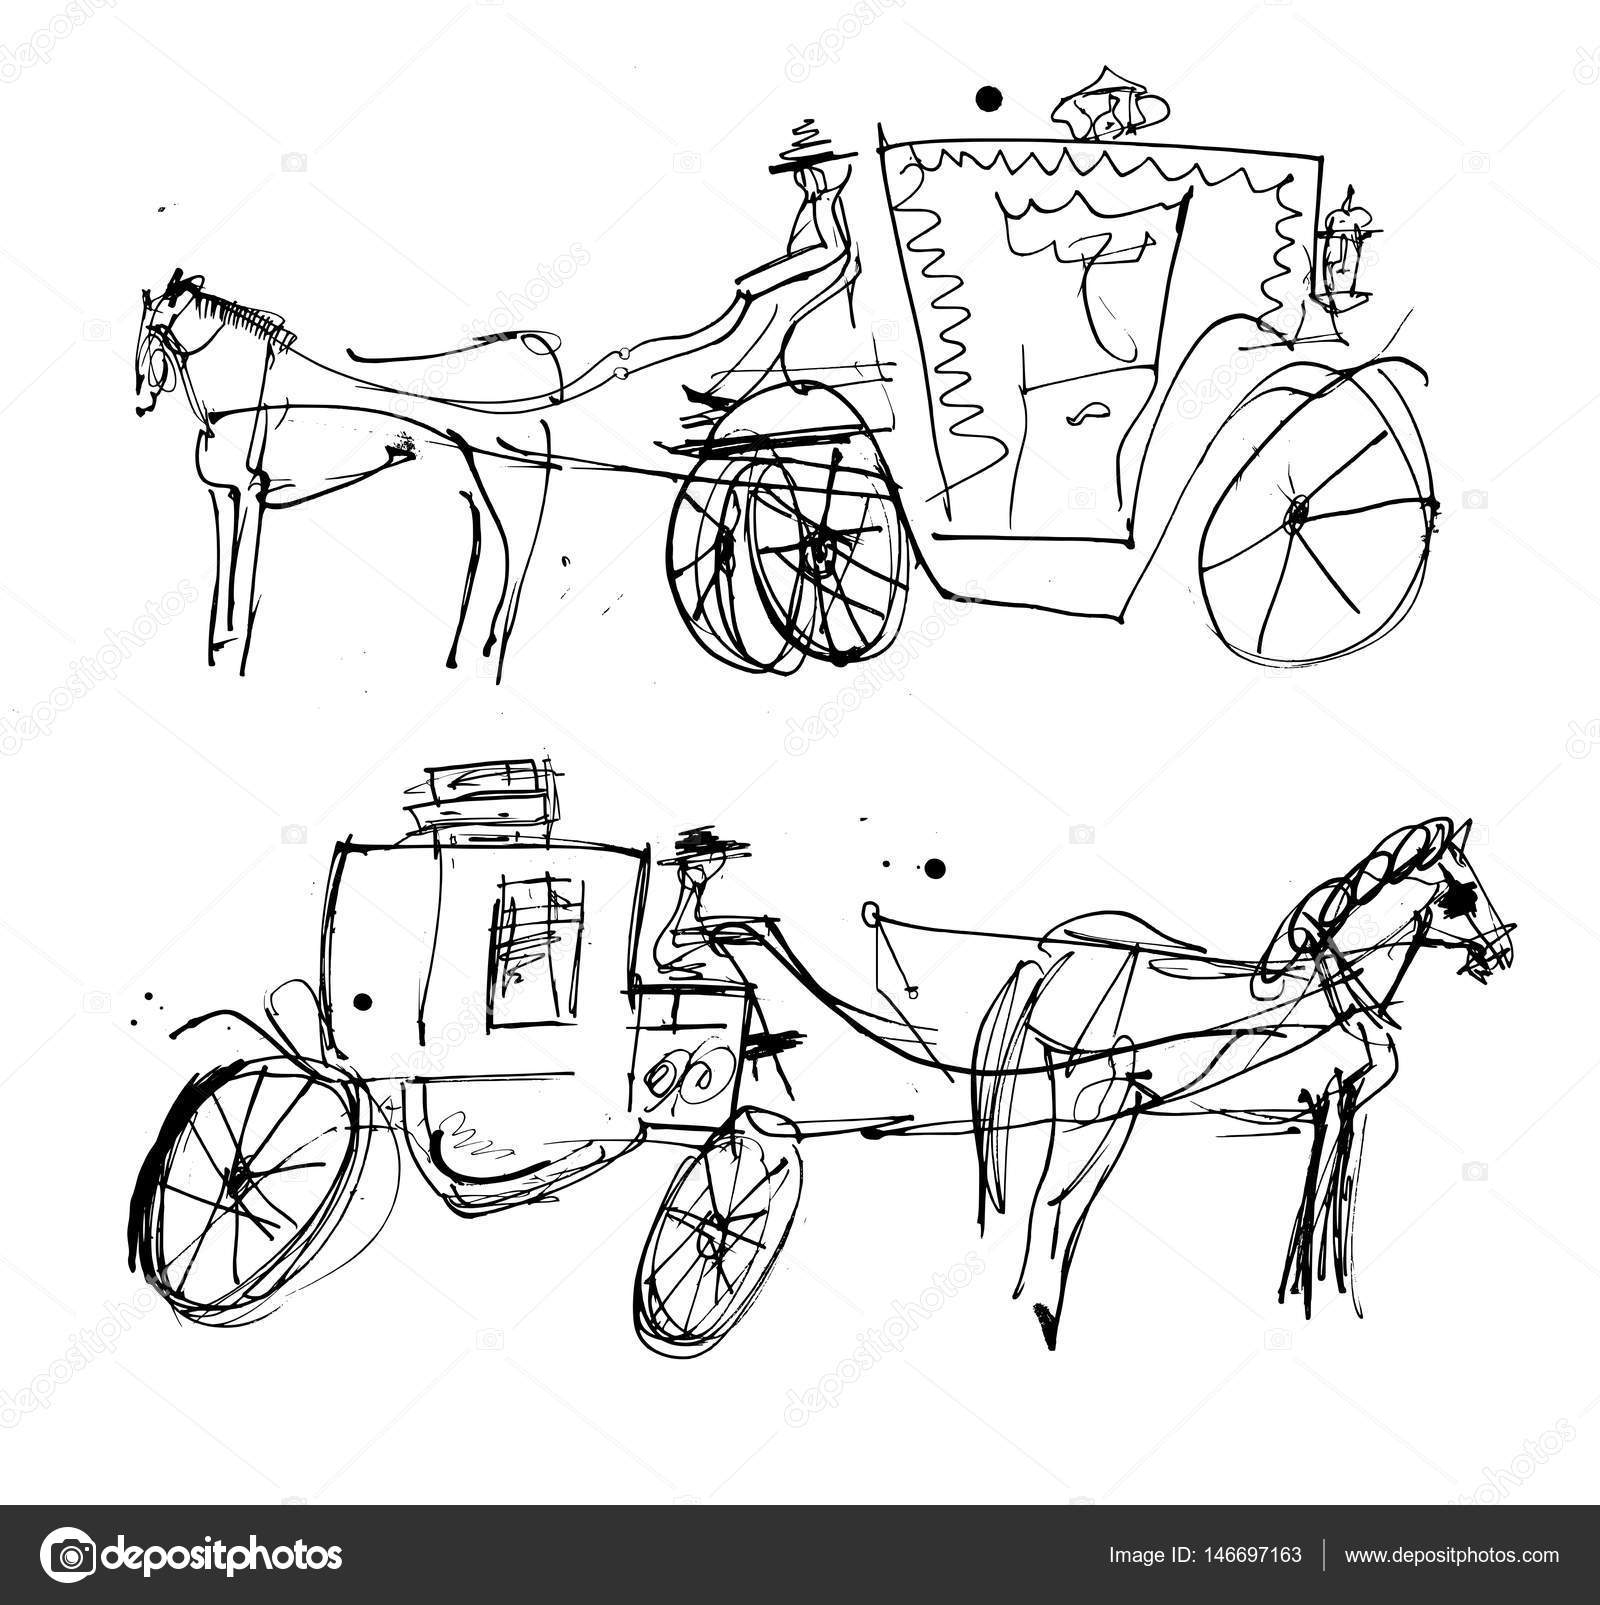  Drawings And Sketches Of Horses With Corral Buggies for Beginner